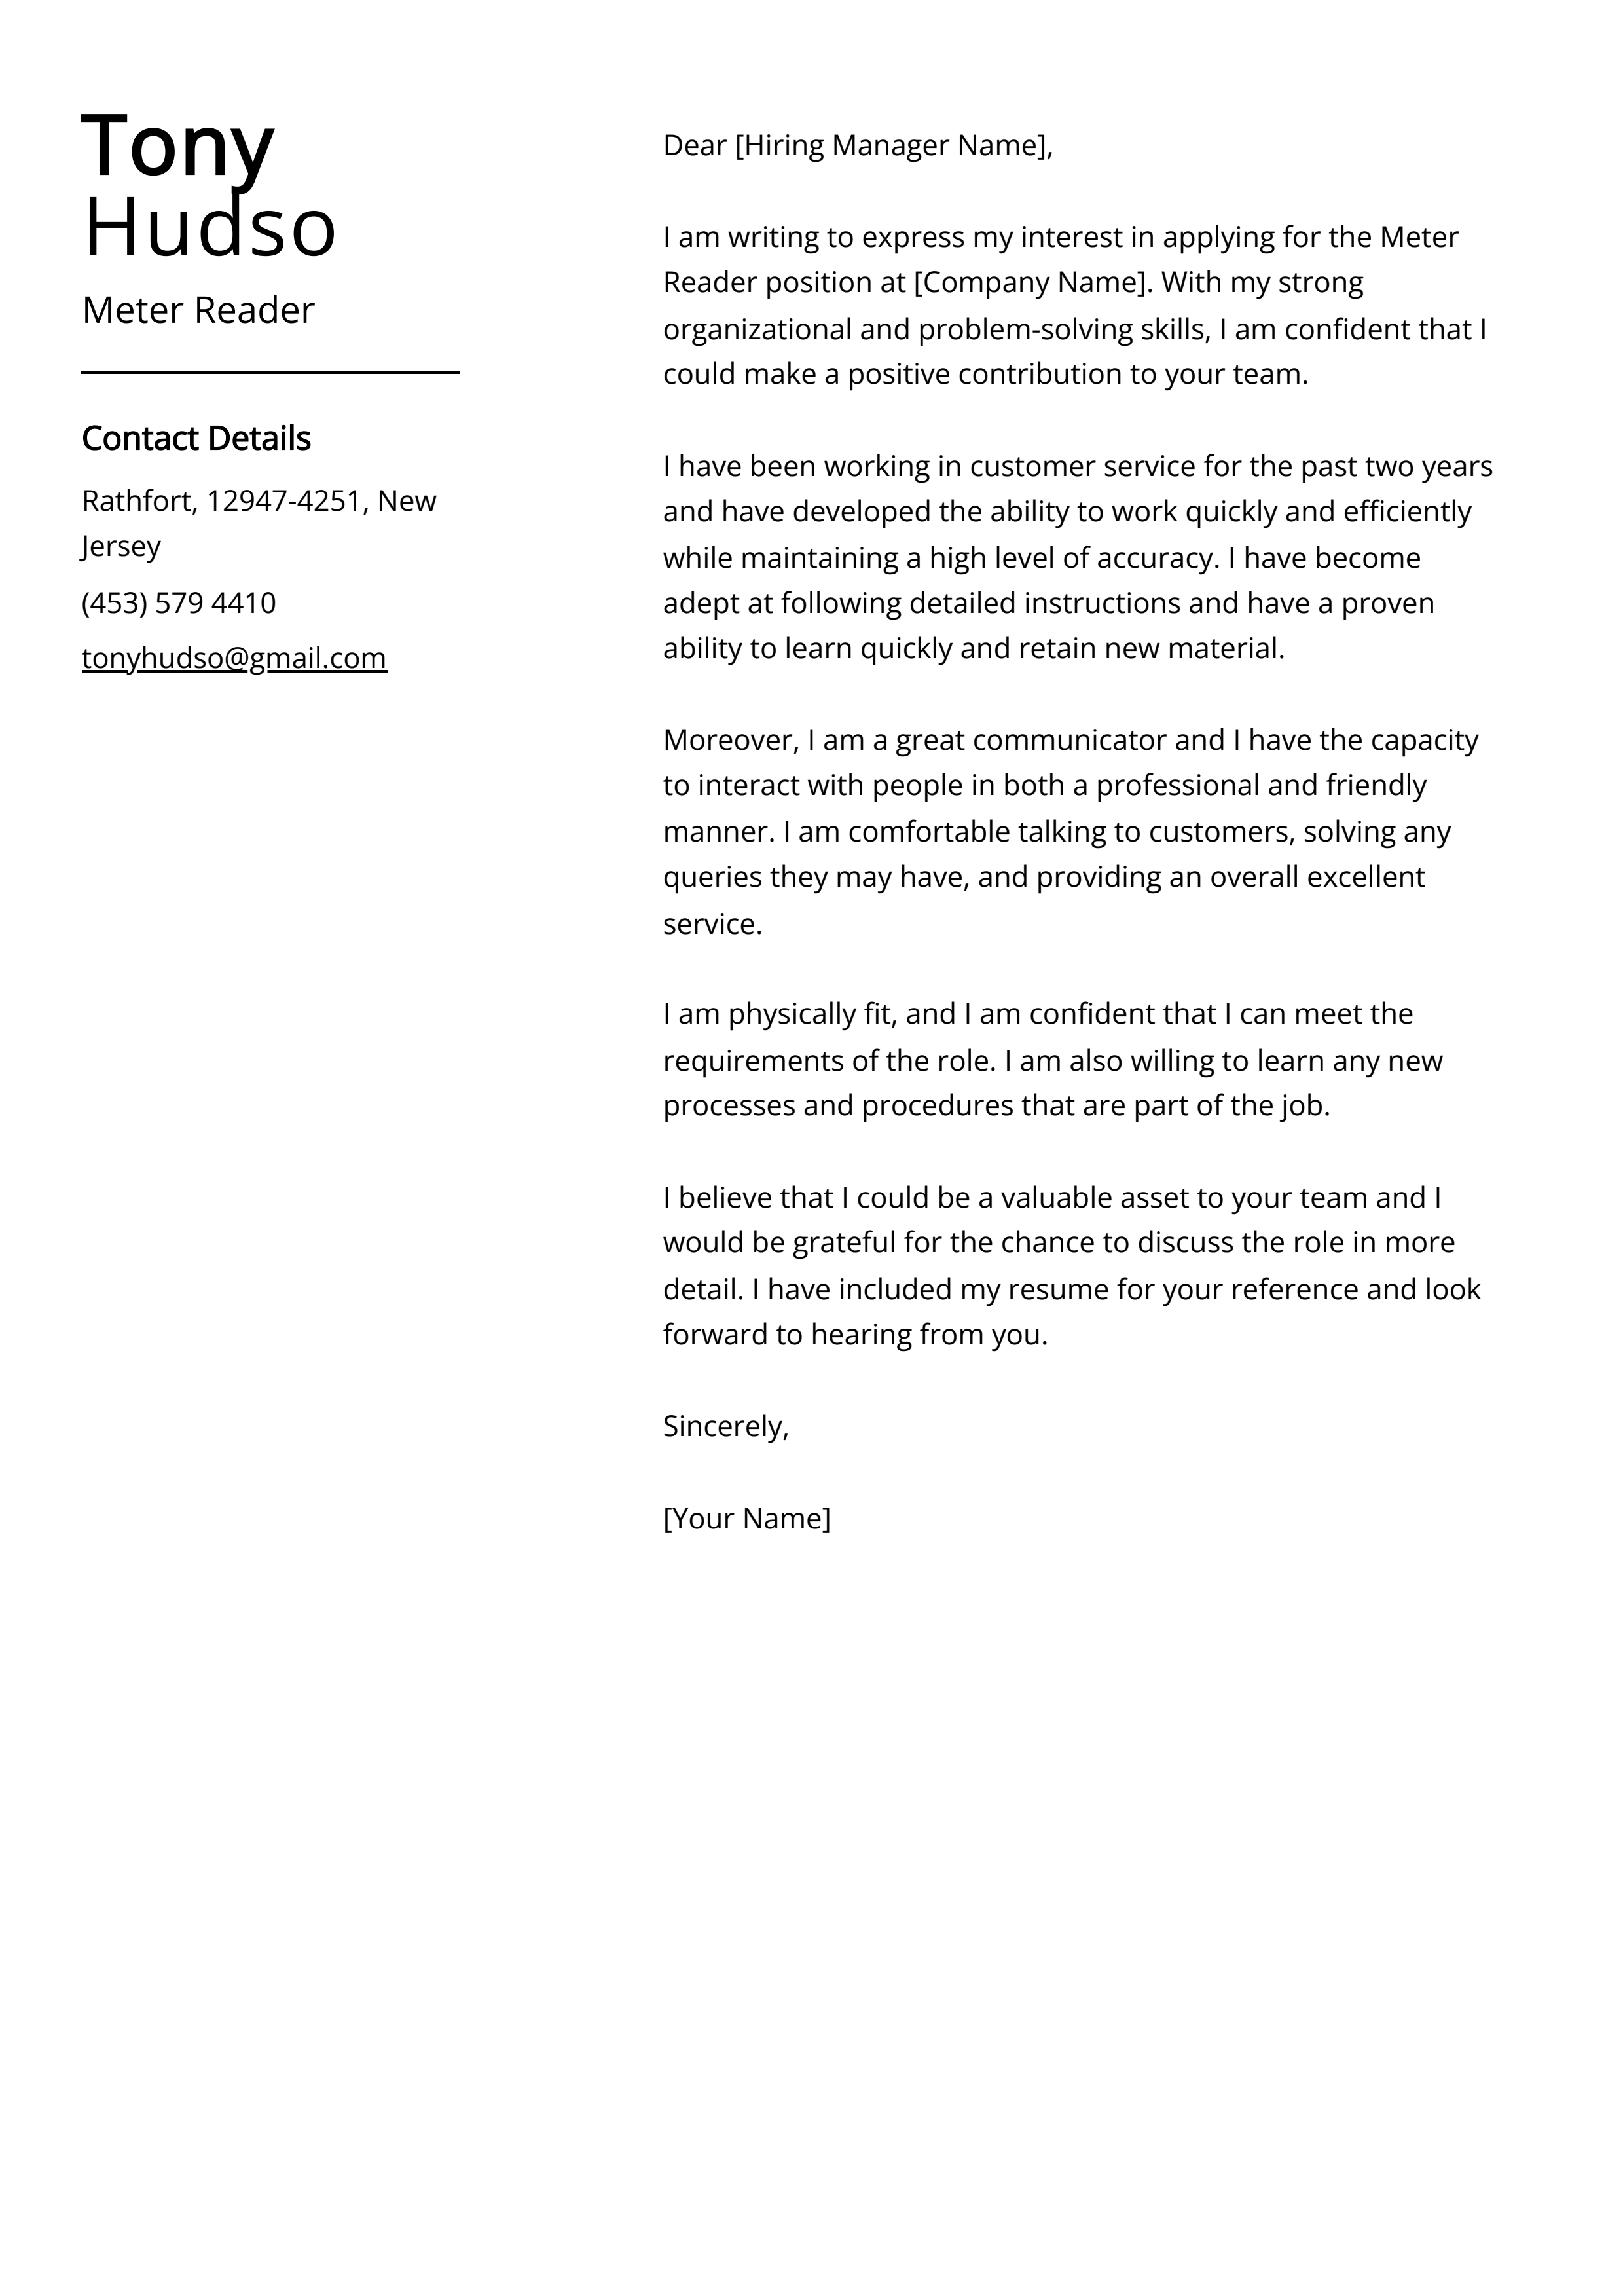 Meter Reader Cover Letter Example